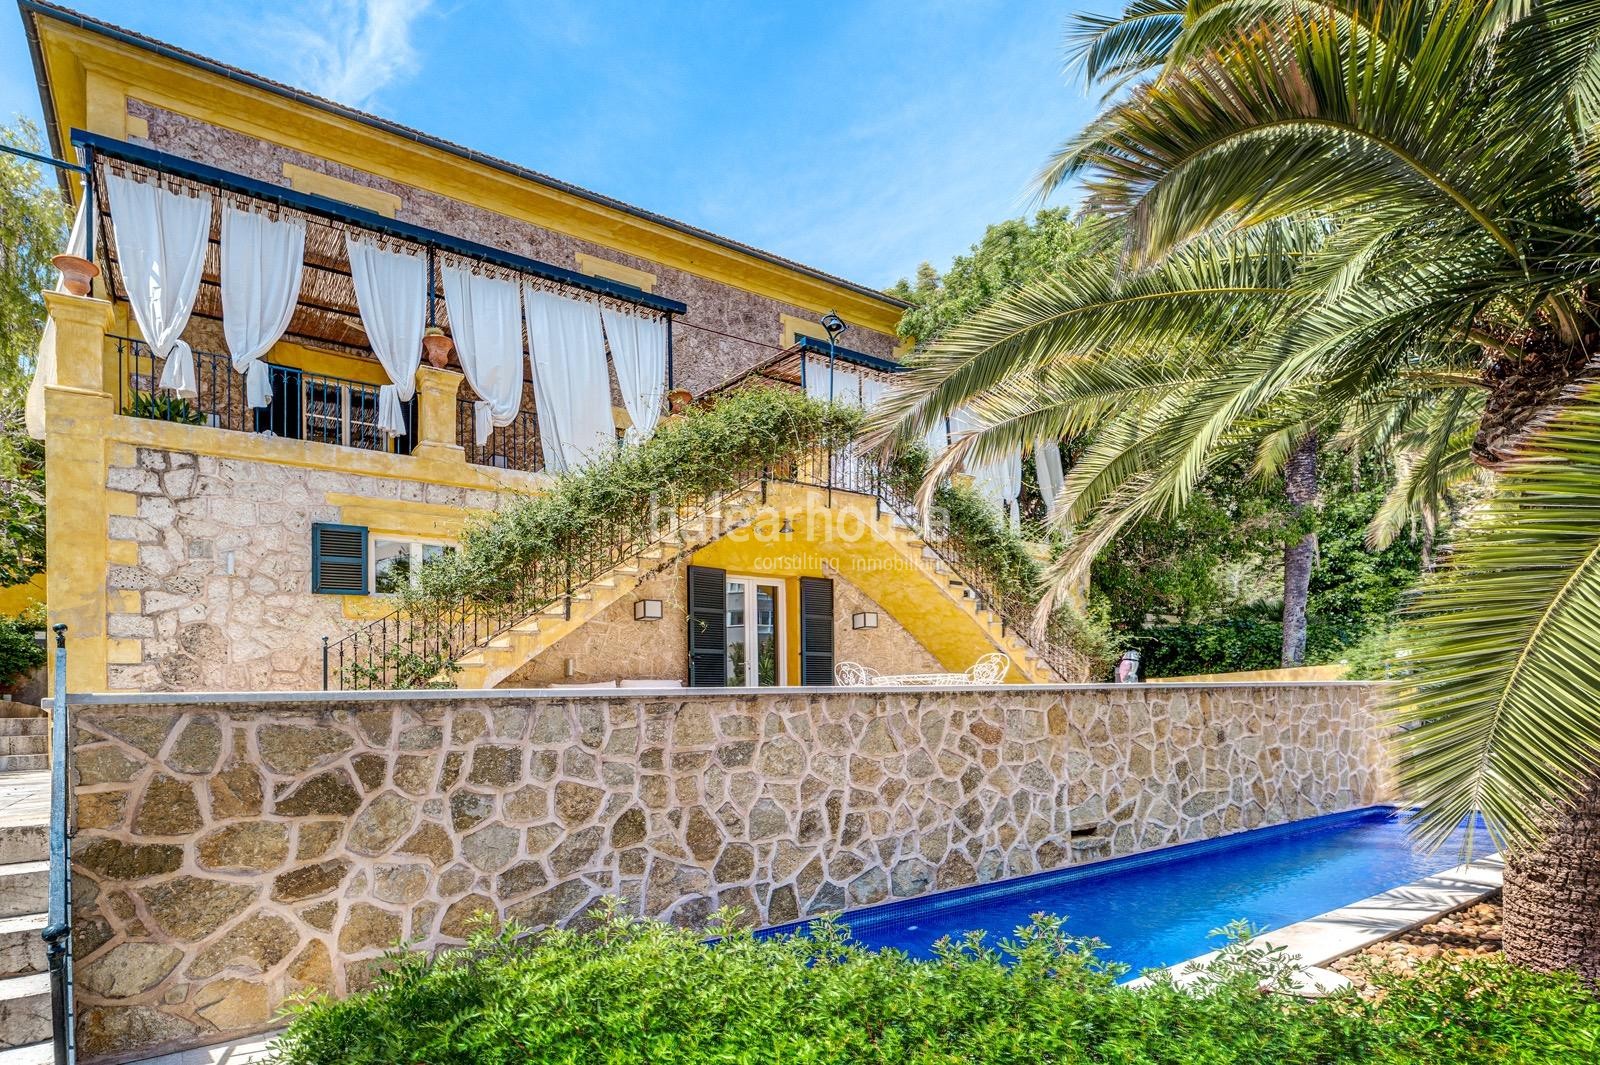 Large stately villa on Palma's Paseo Marítimo with swimming pool, garden and modern interiors